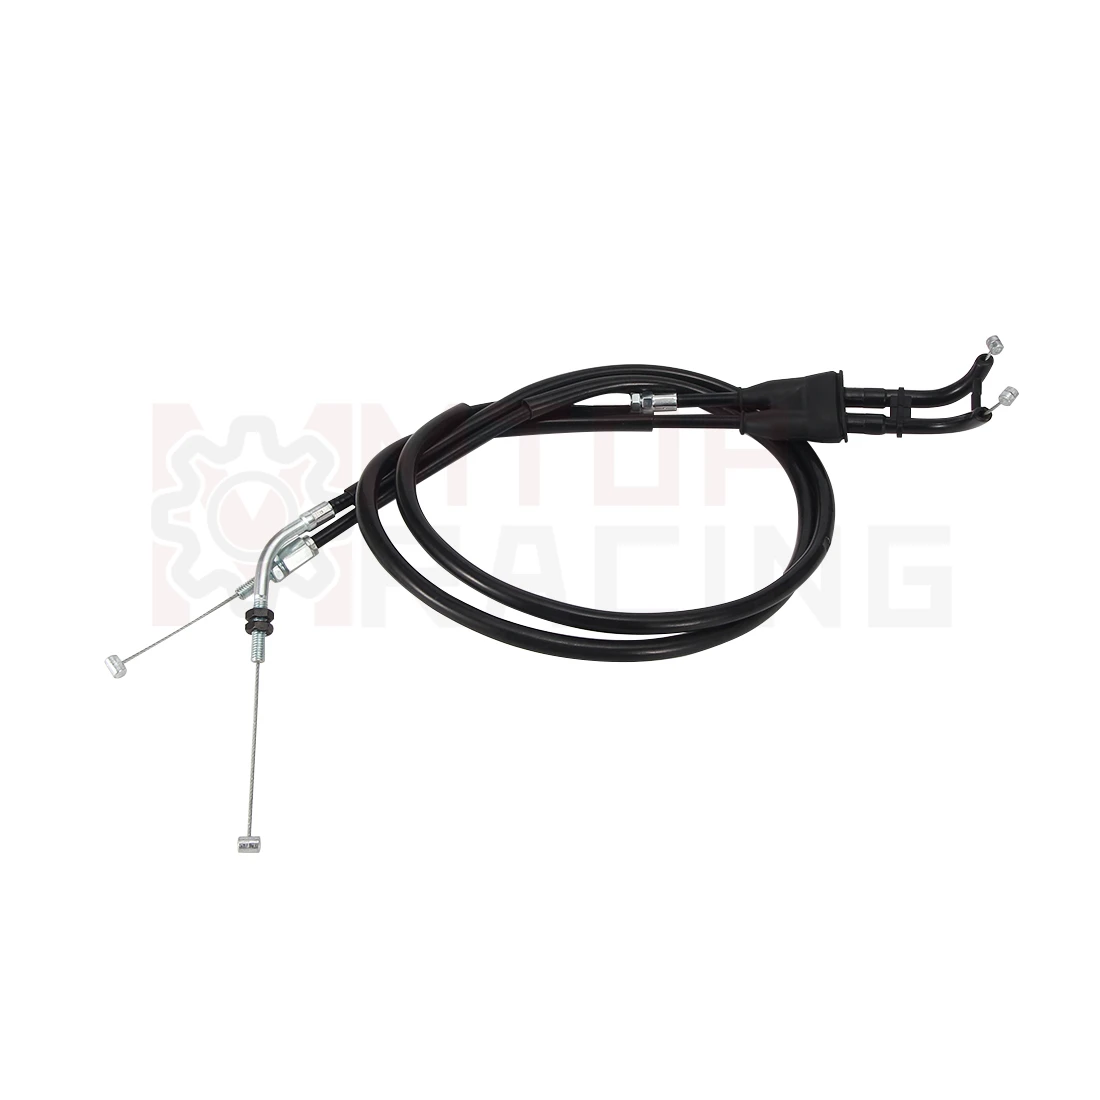 

Accelerator Gas Cable Throttle Line For Suzuki XT225WE Serow 2000 2001 2002 2003 2004 5MP-26302-00-00